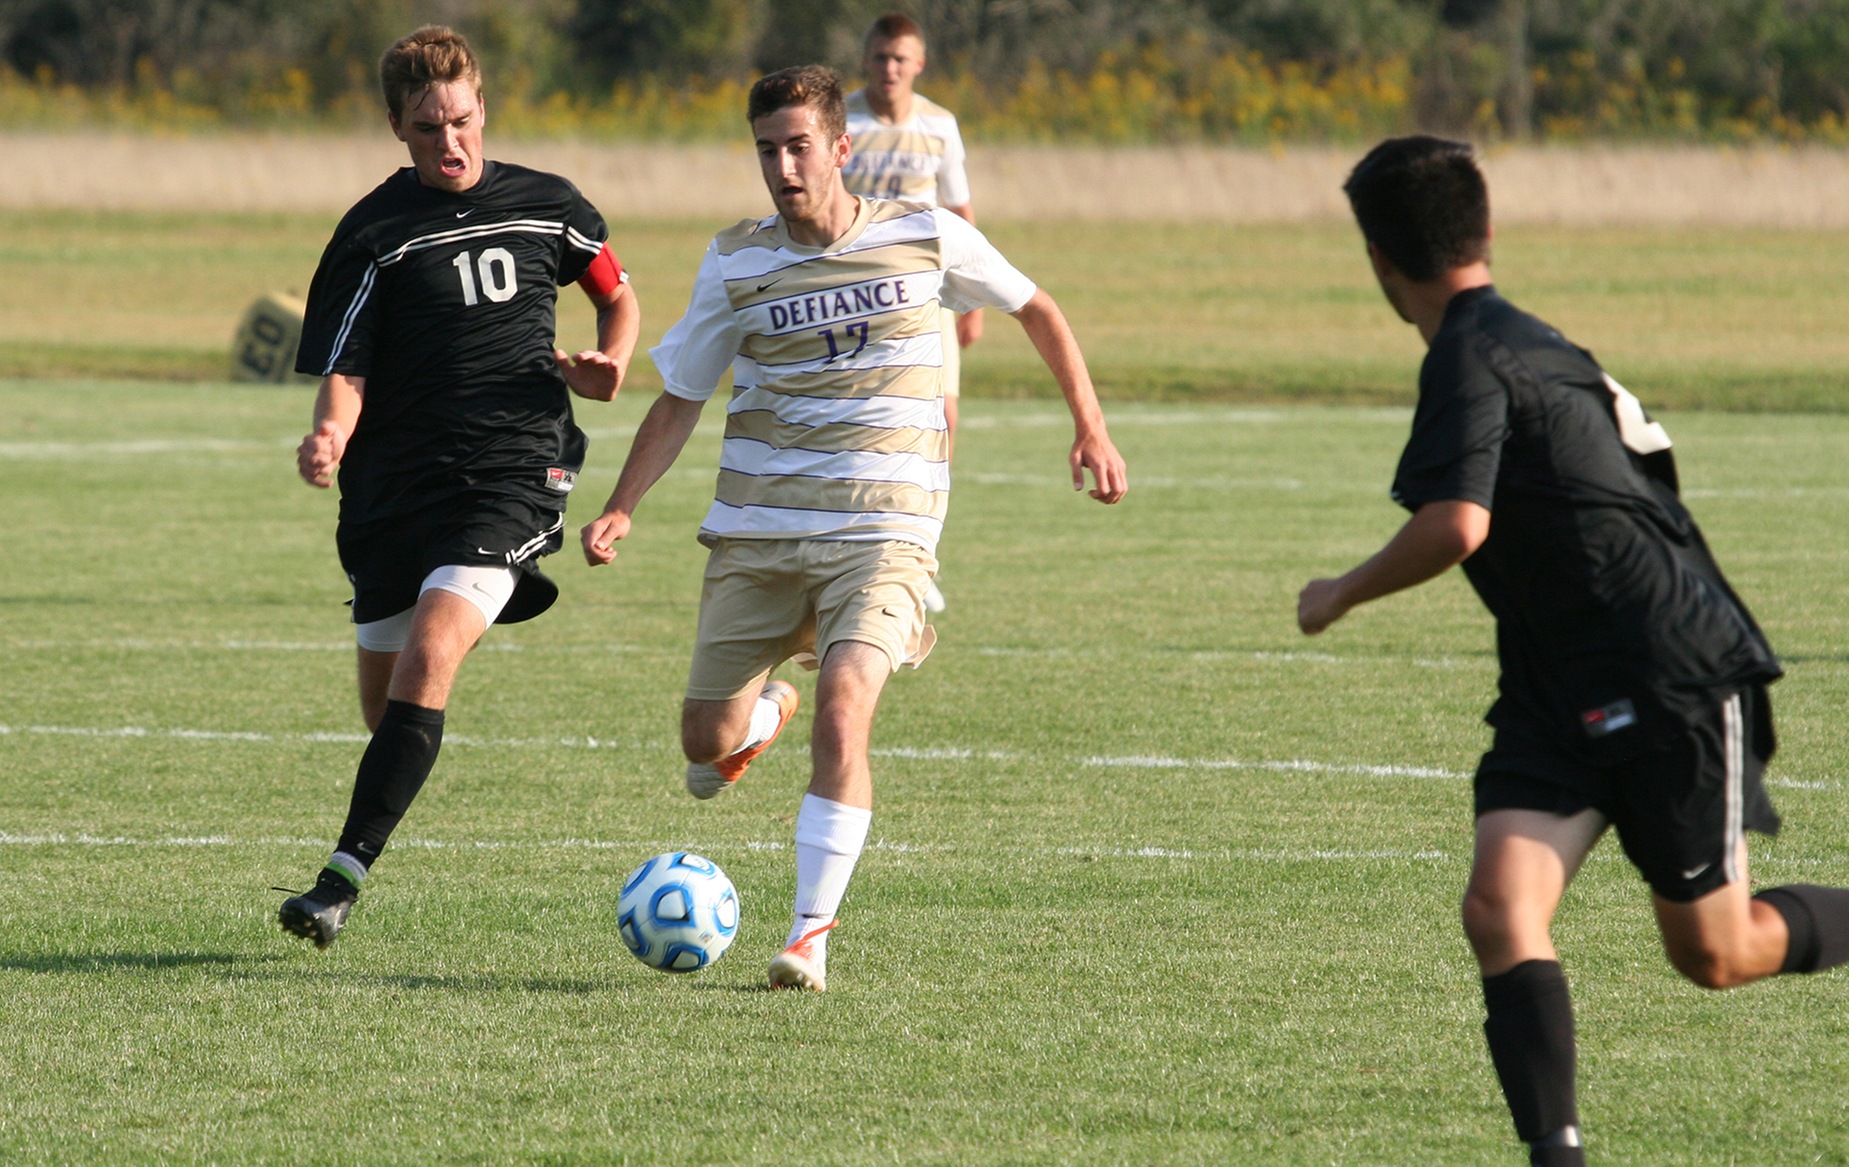 Yellow Jackets Defeat the Spartans, 3-1